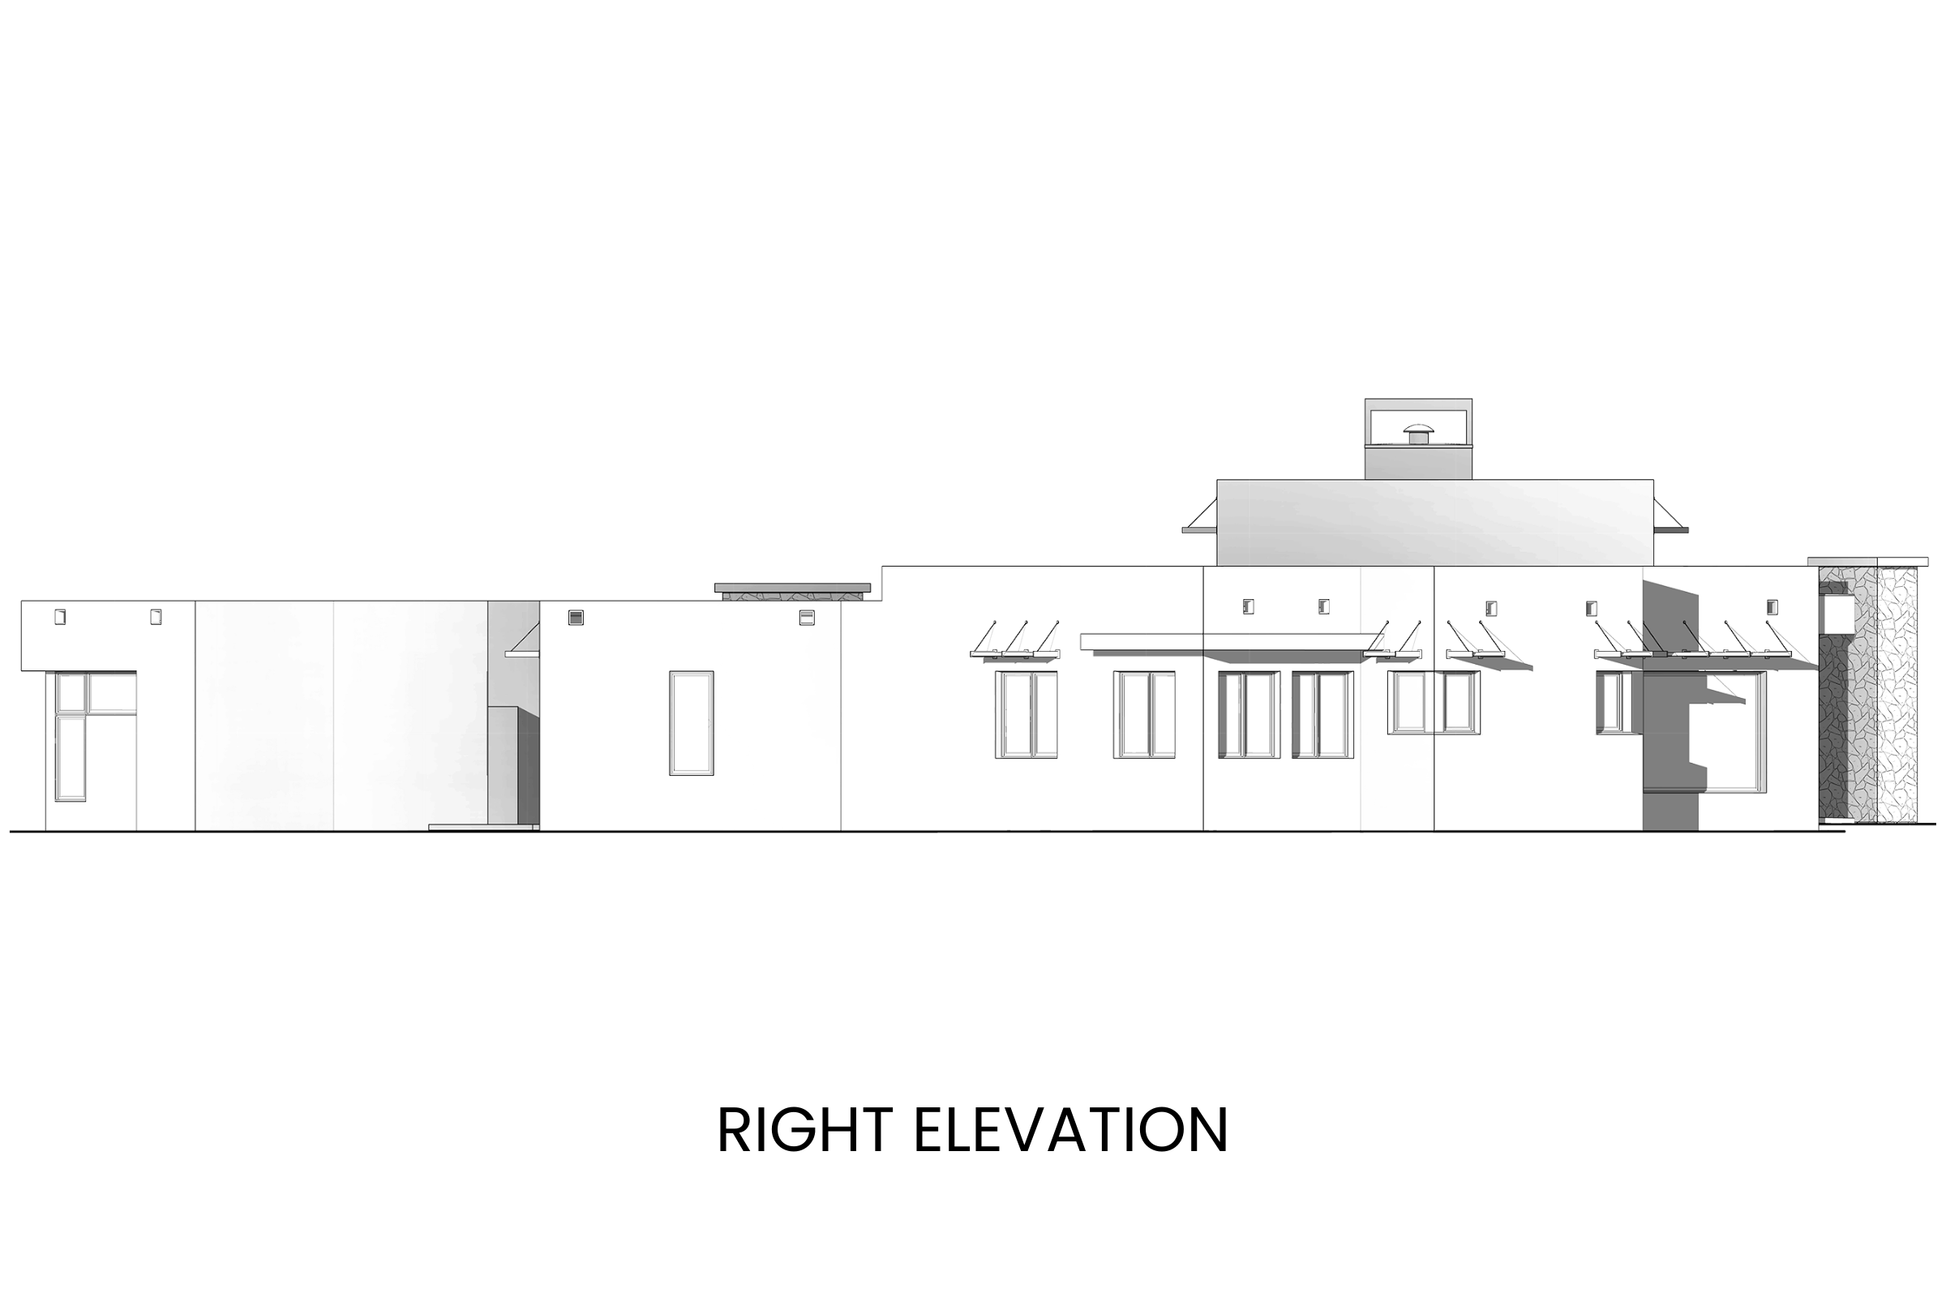 Modern-Minimalist-Ranch-Plan-for-Wide-Sites-Right-Elevation-Rocky-Mountain-Plan-Company-Crescent-Lake